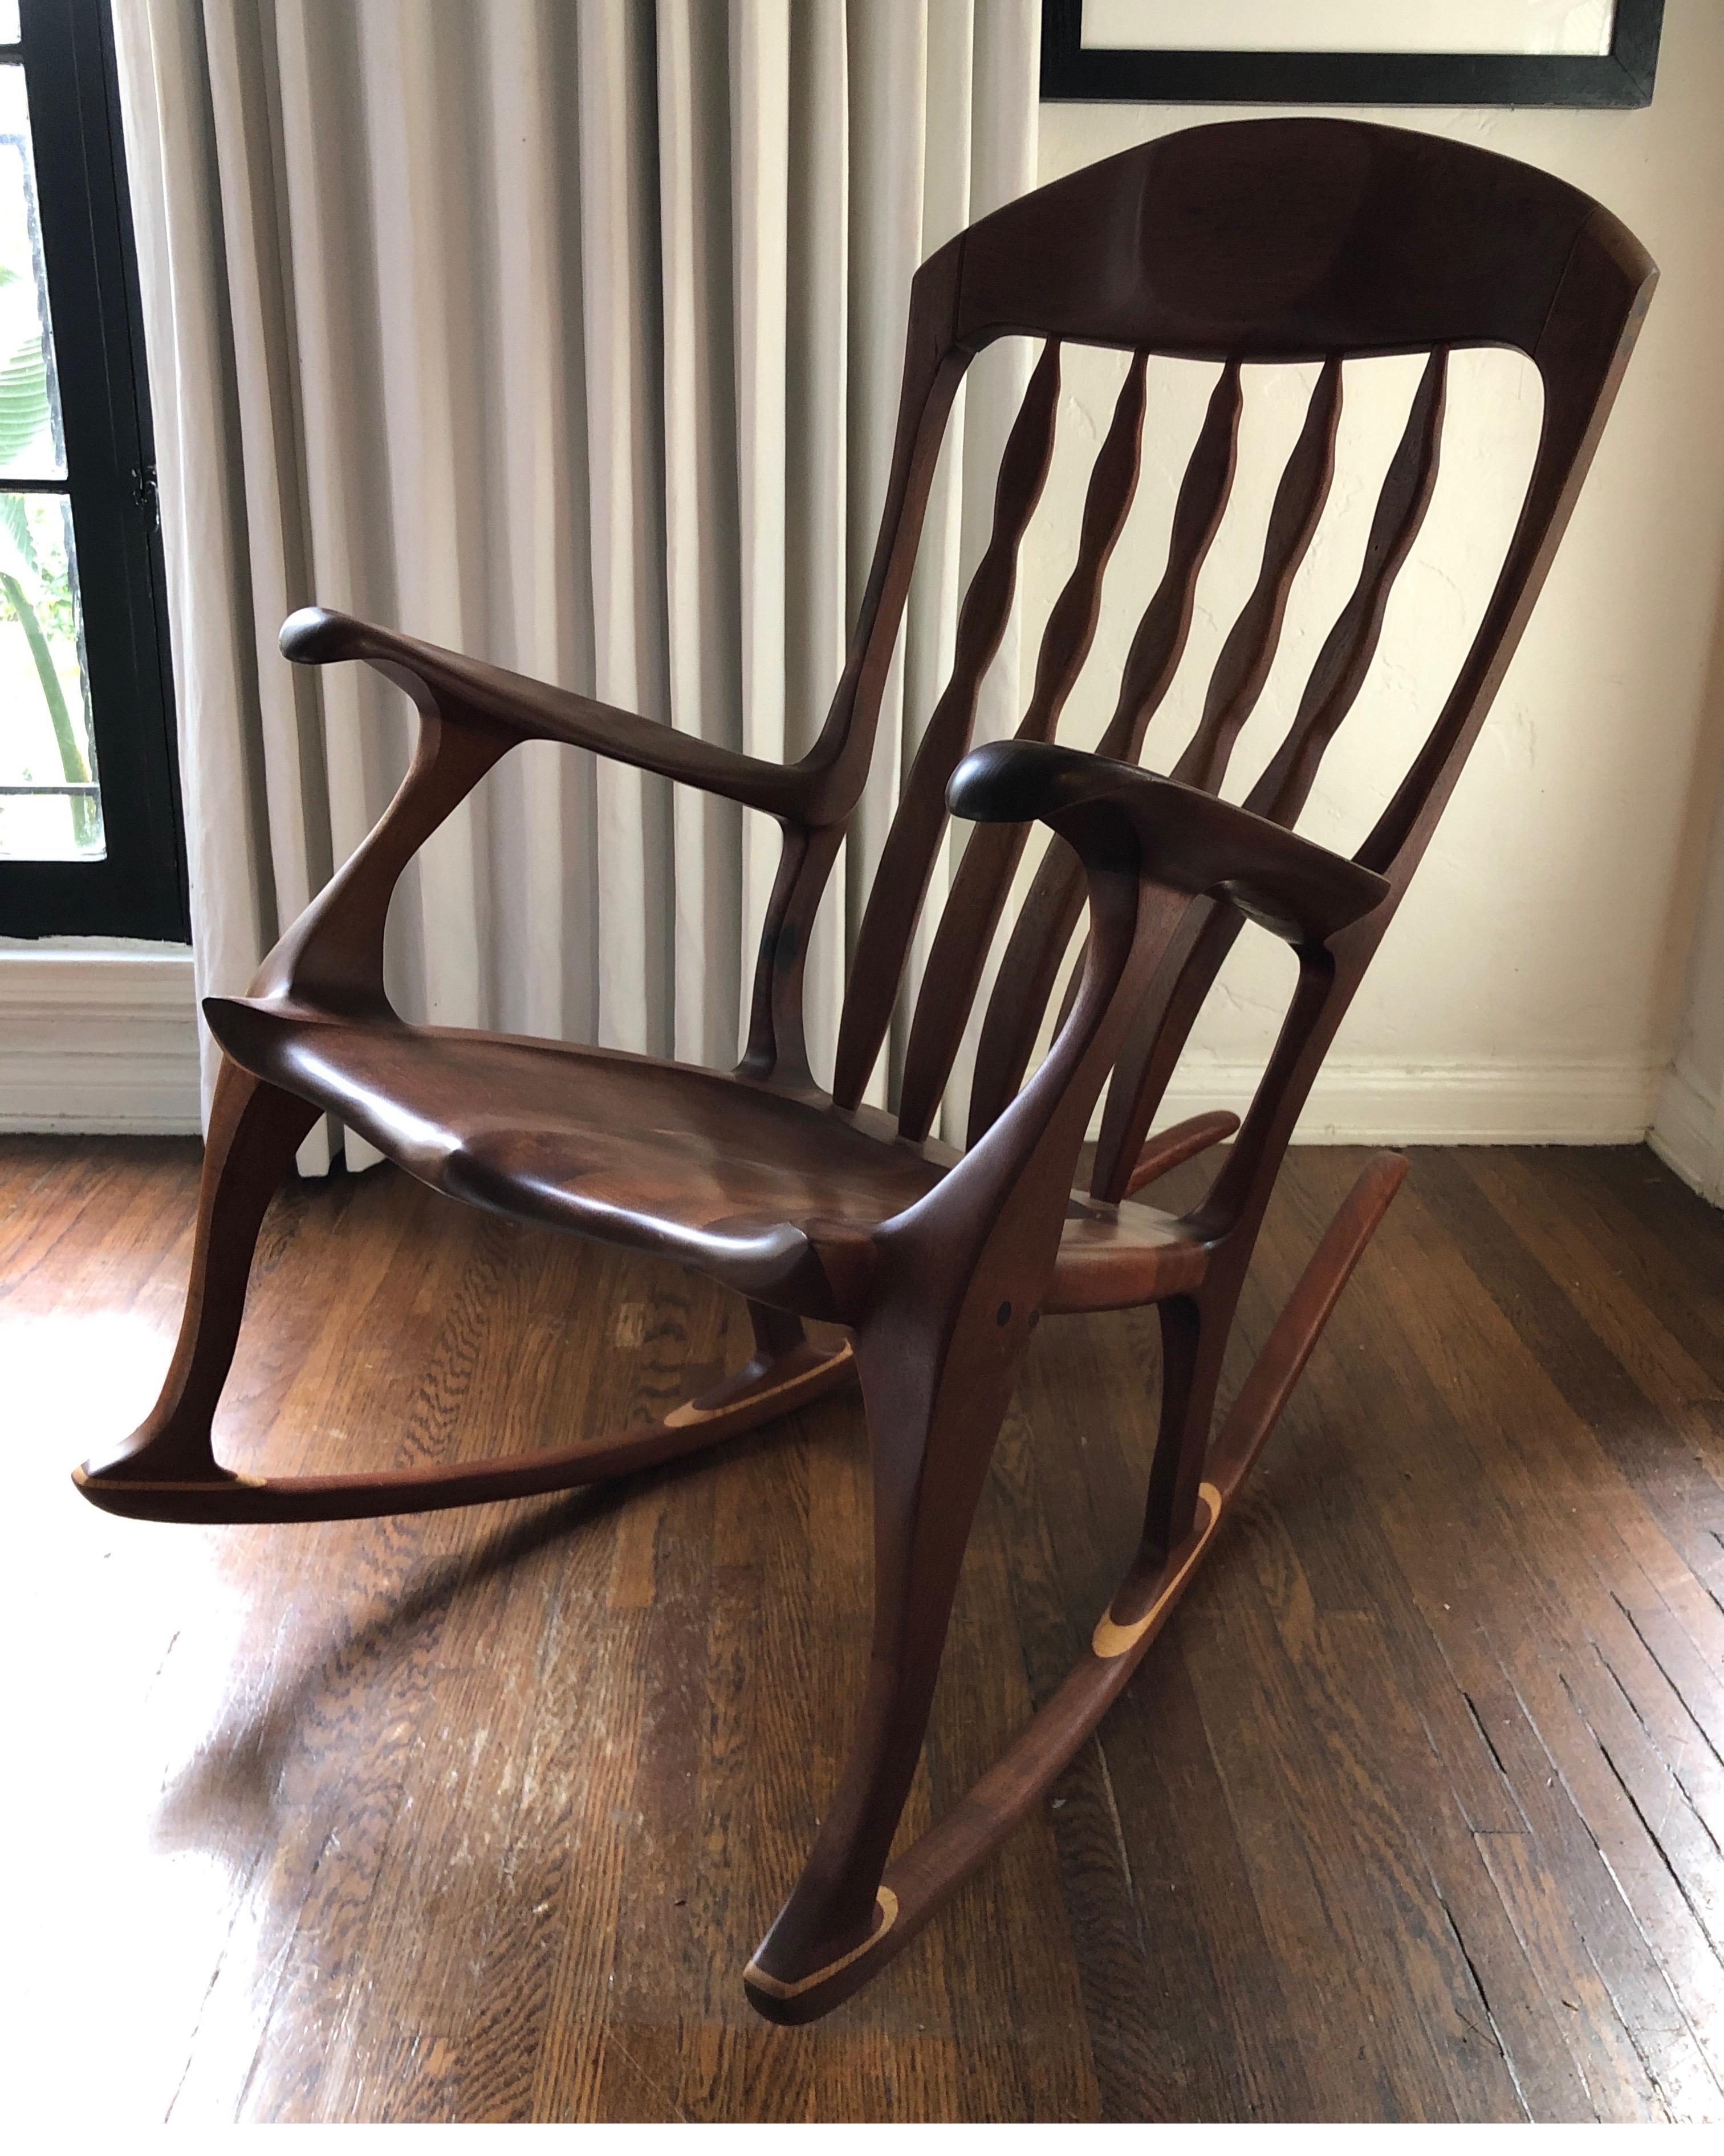 Hand carved rare tiger maple Sam Maloof style rocking chair.
Mid-Century Modern with incredible unique lines.

Large sized and very comfortable. 

Signed Bill Kappell.